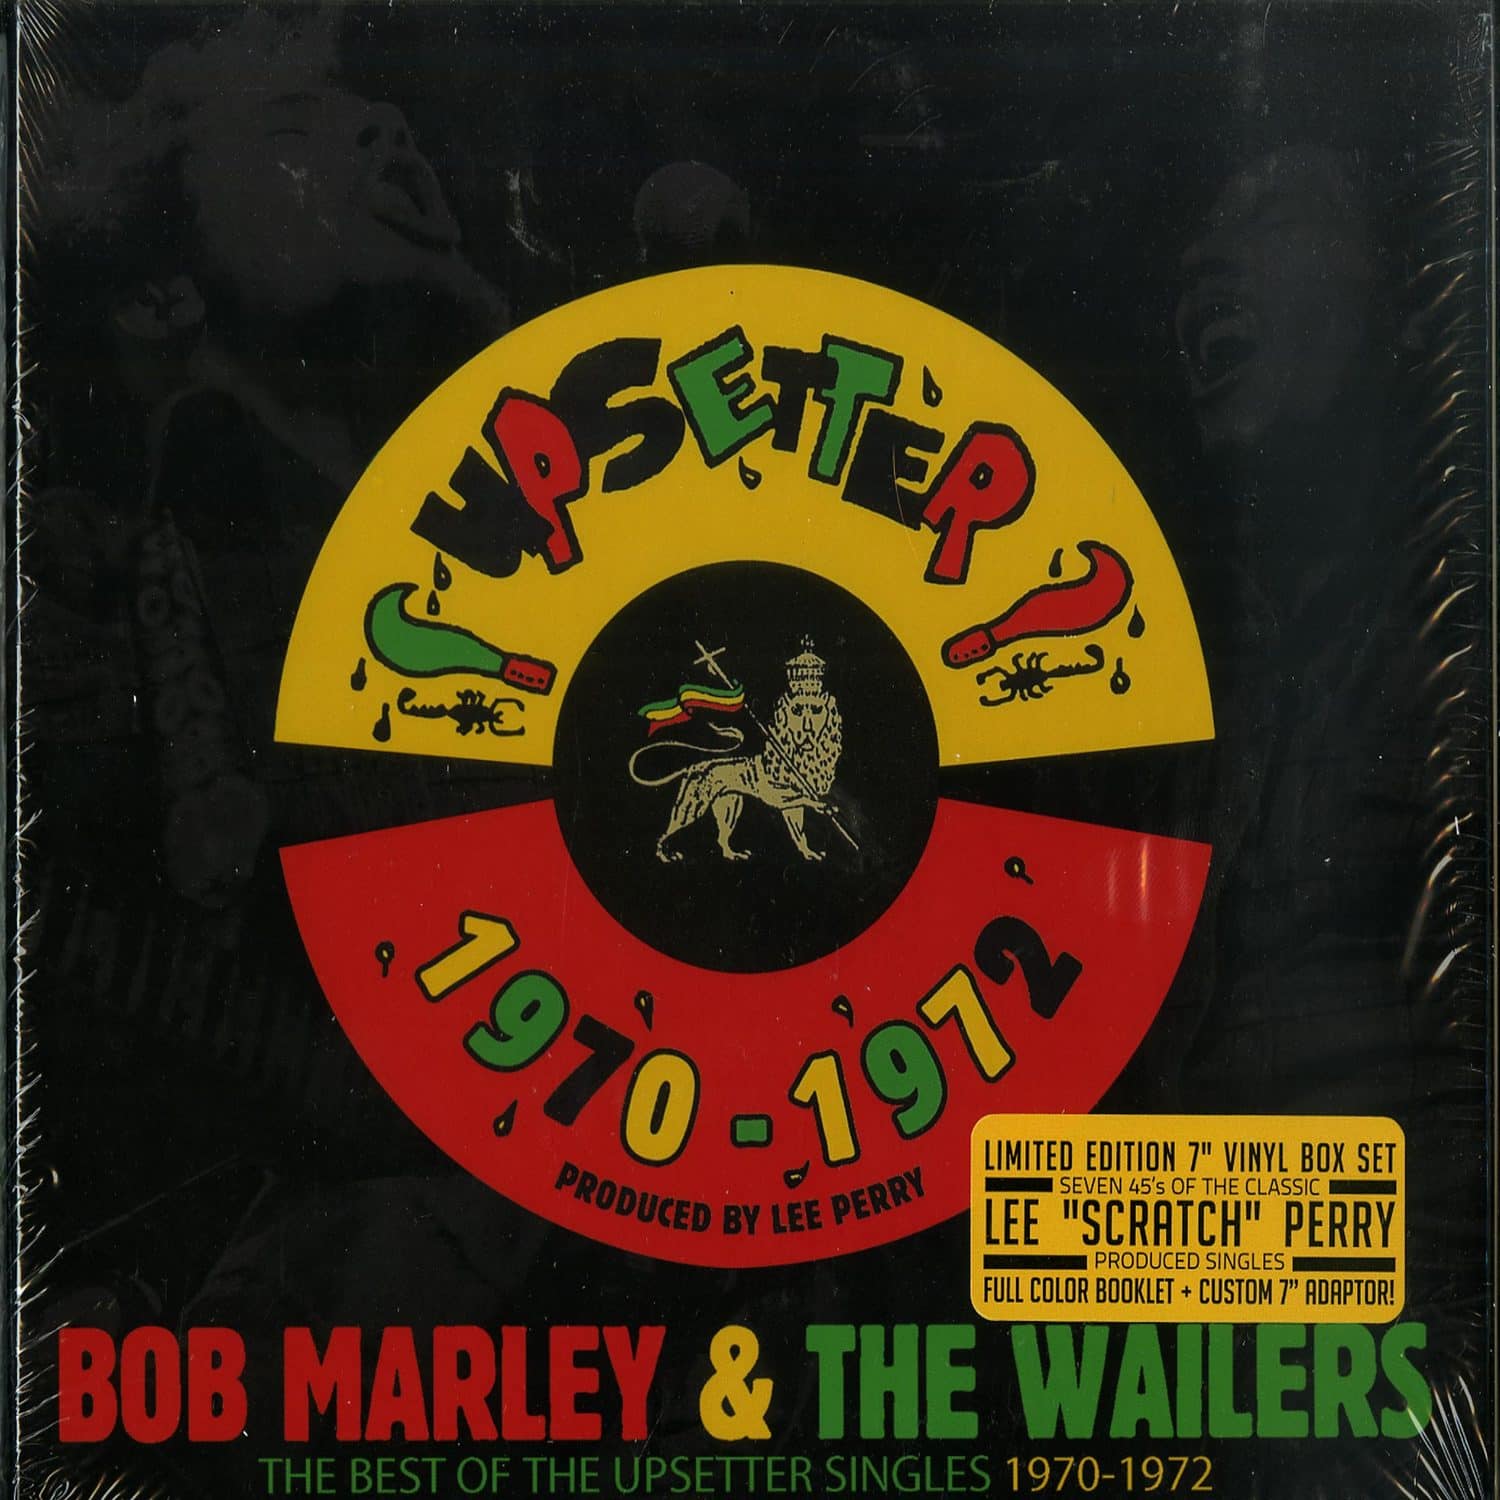 Bob Marley & The Wailers - BEST OF THE UPSETTER SINGLES 1970-1972 